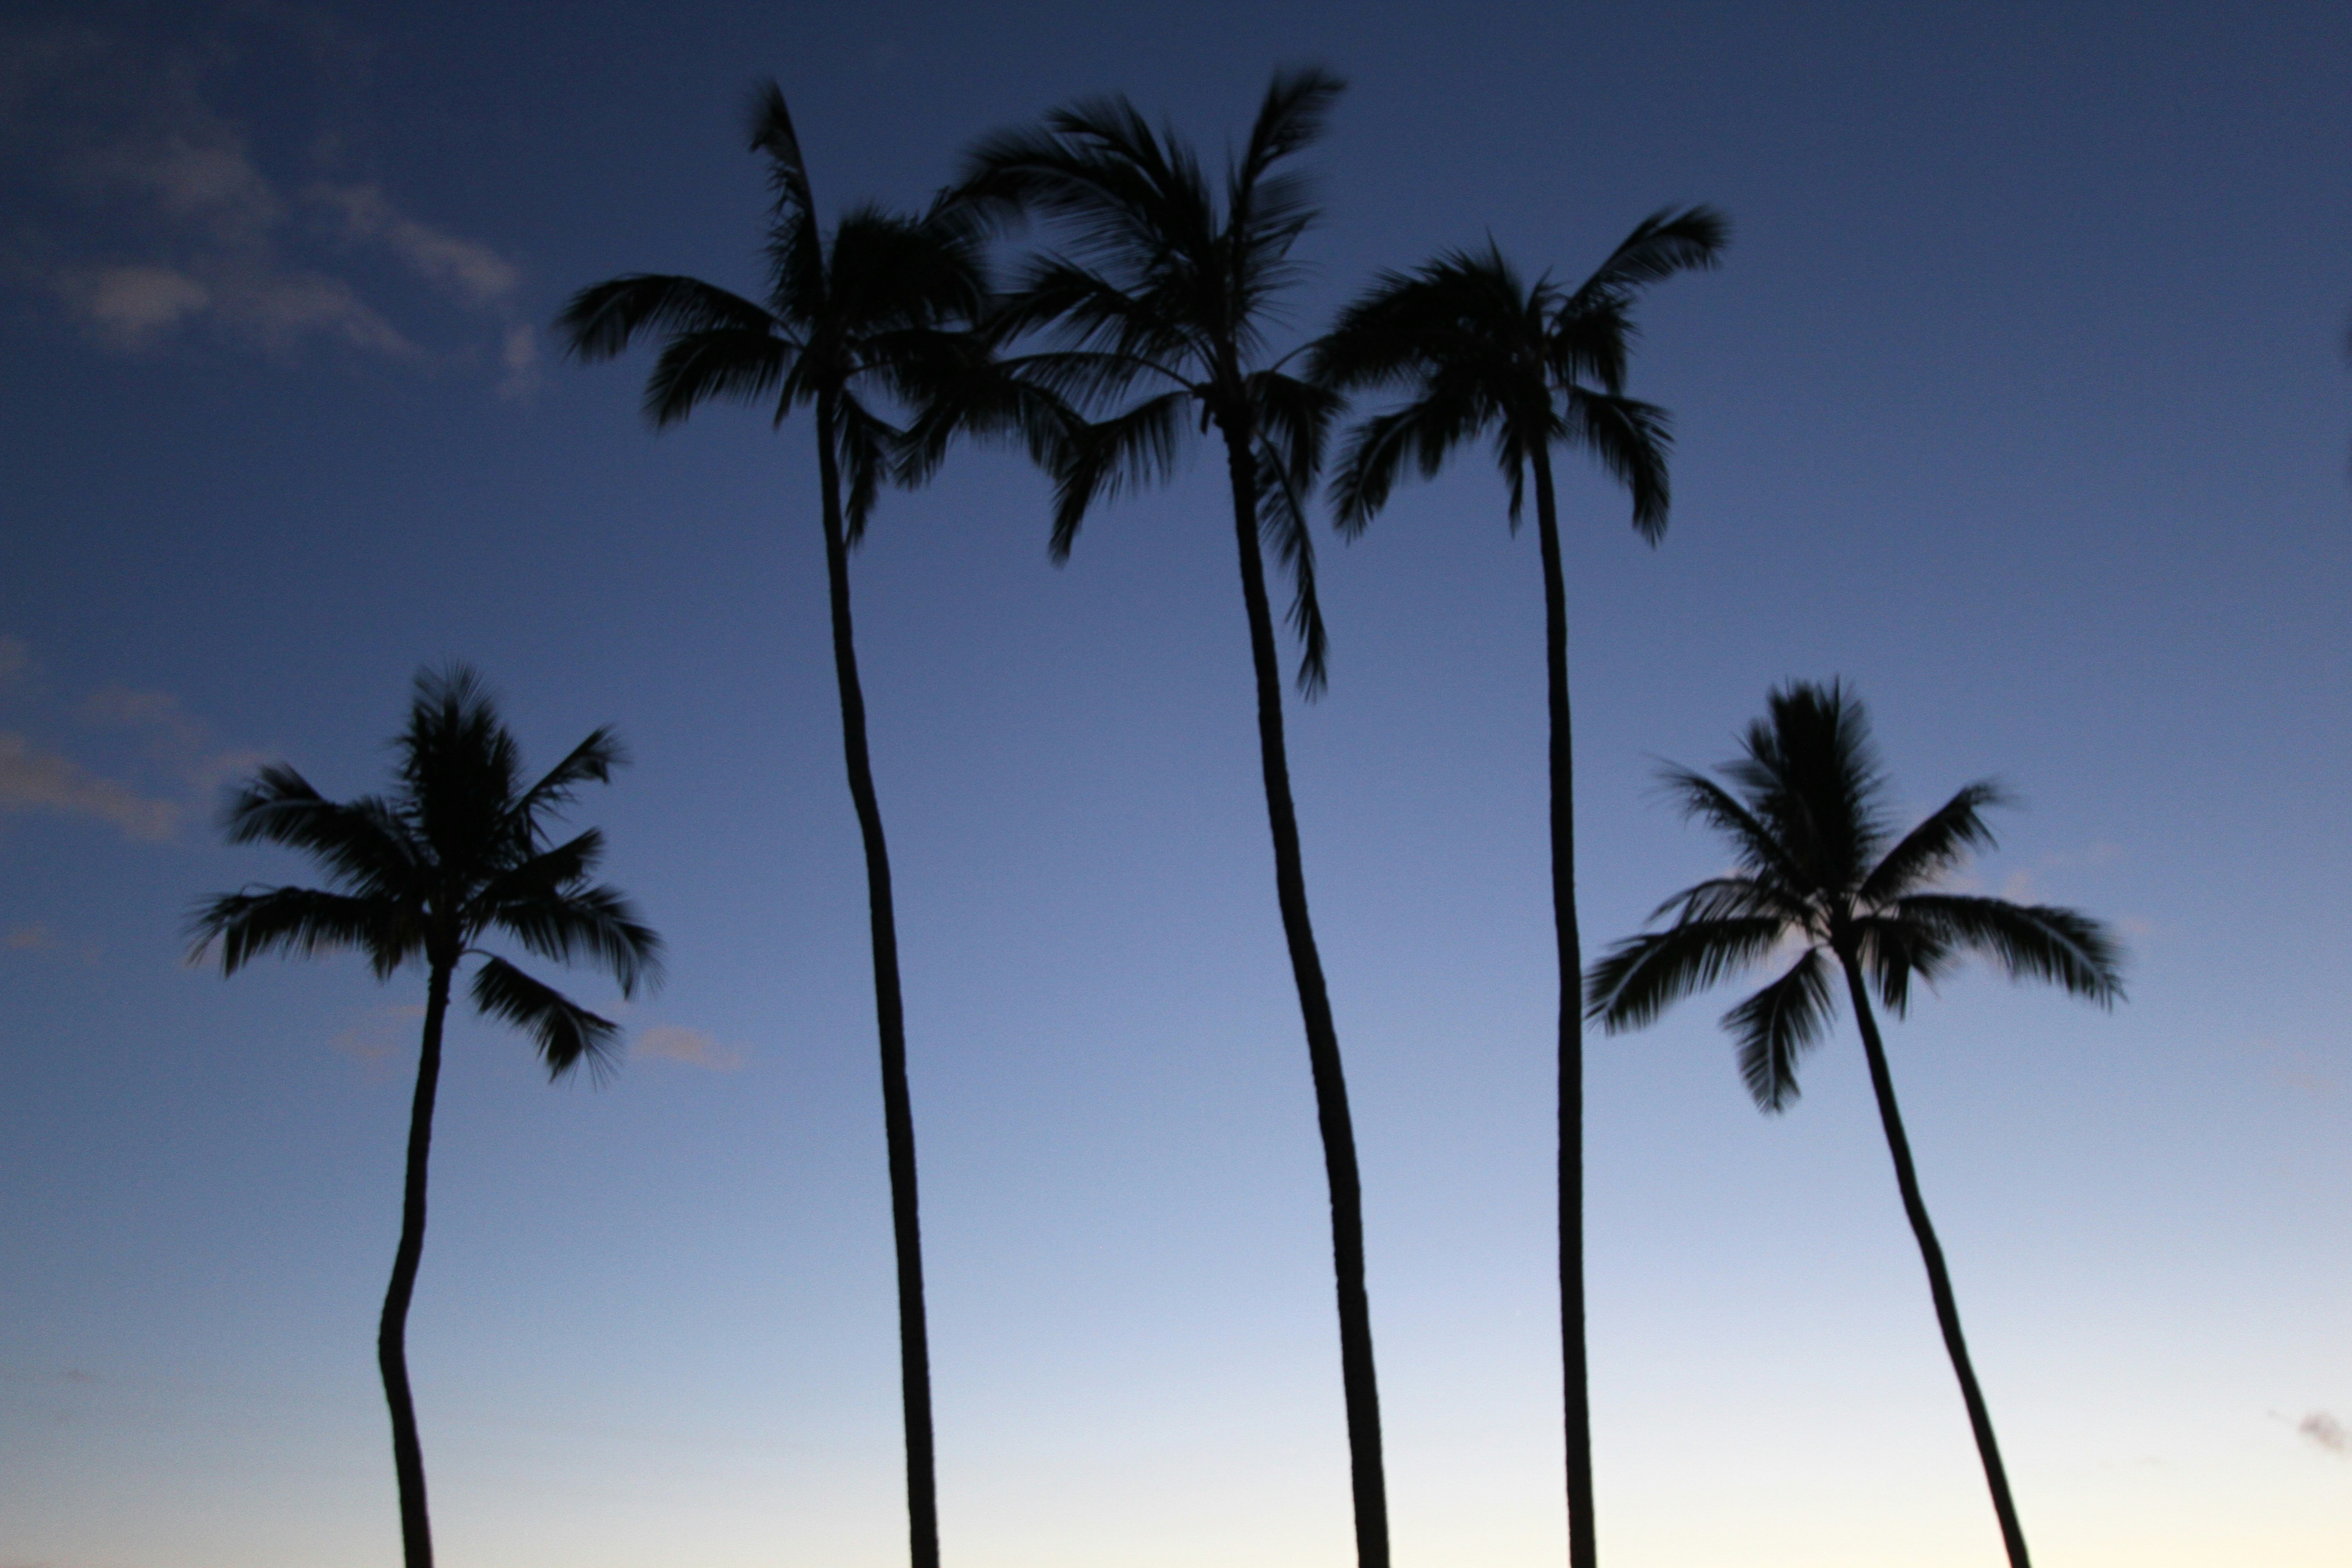 Large palm trees on a beach in Hawaii.